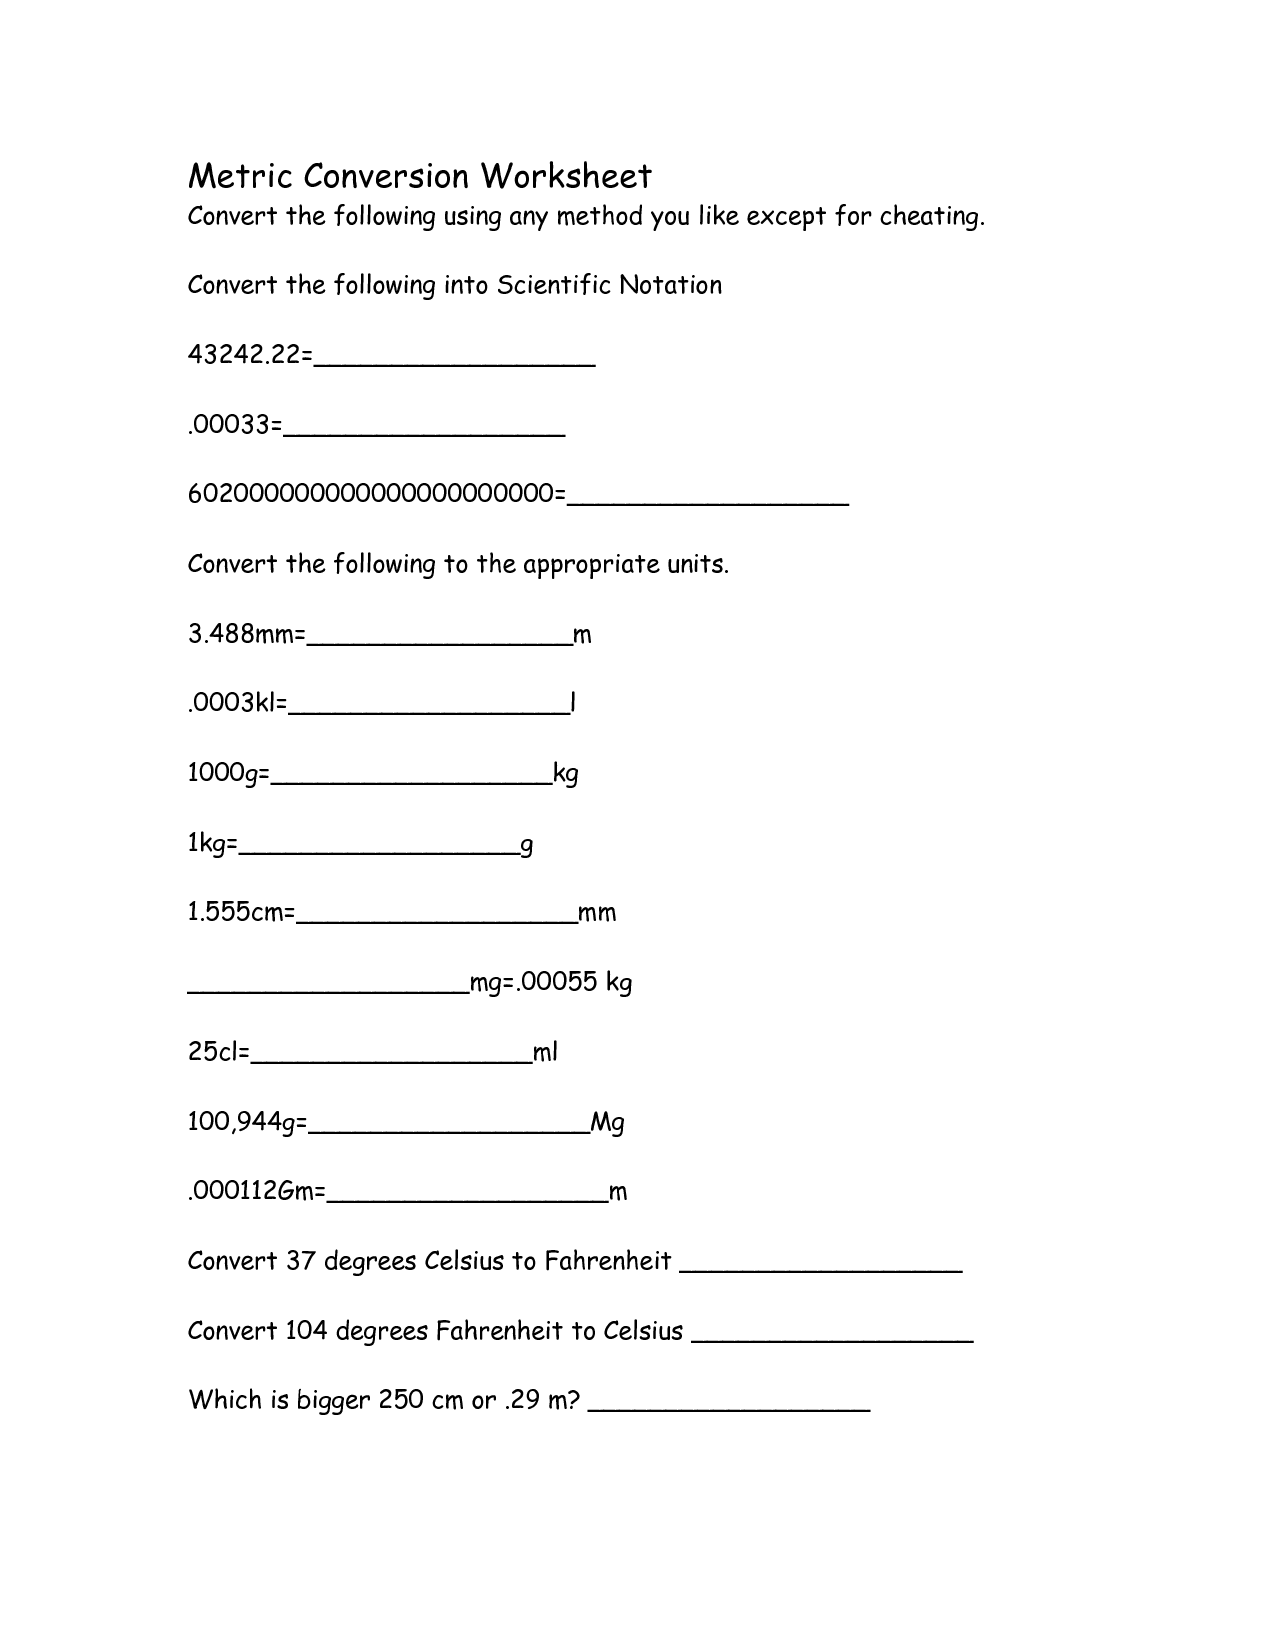 6-best-images-of-metric-mania-conversion-worksheet-answers-metric-system-conversion-worksheet